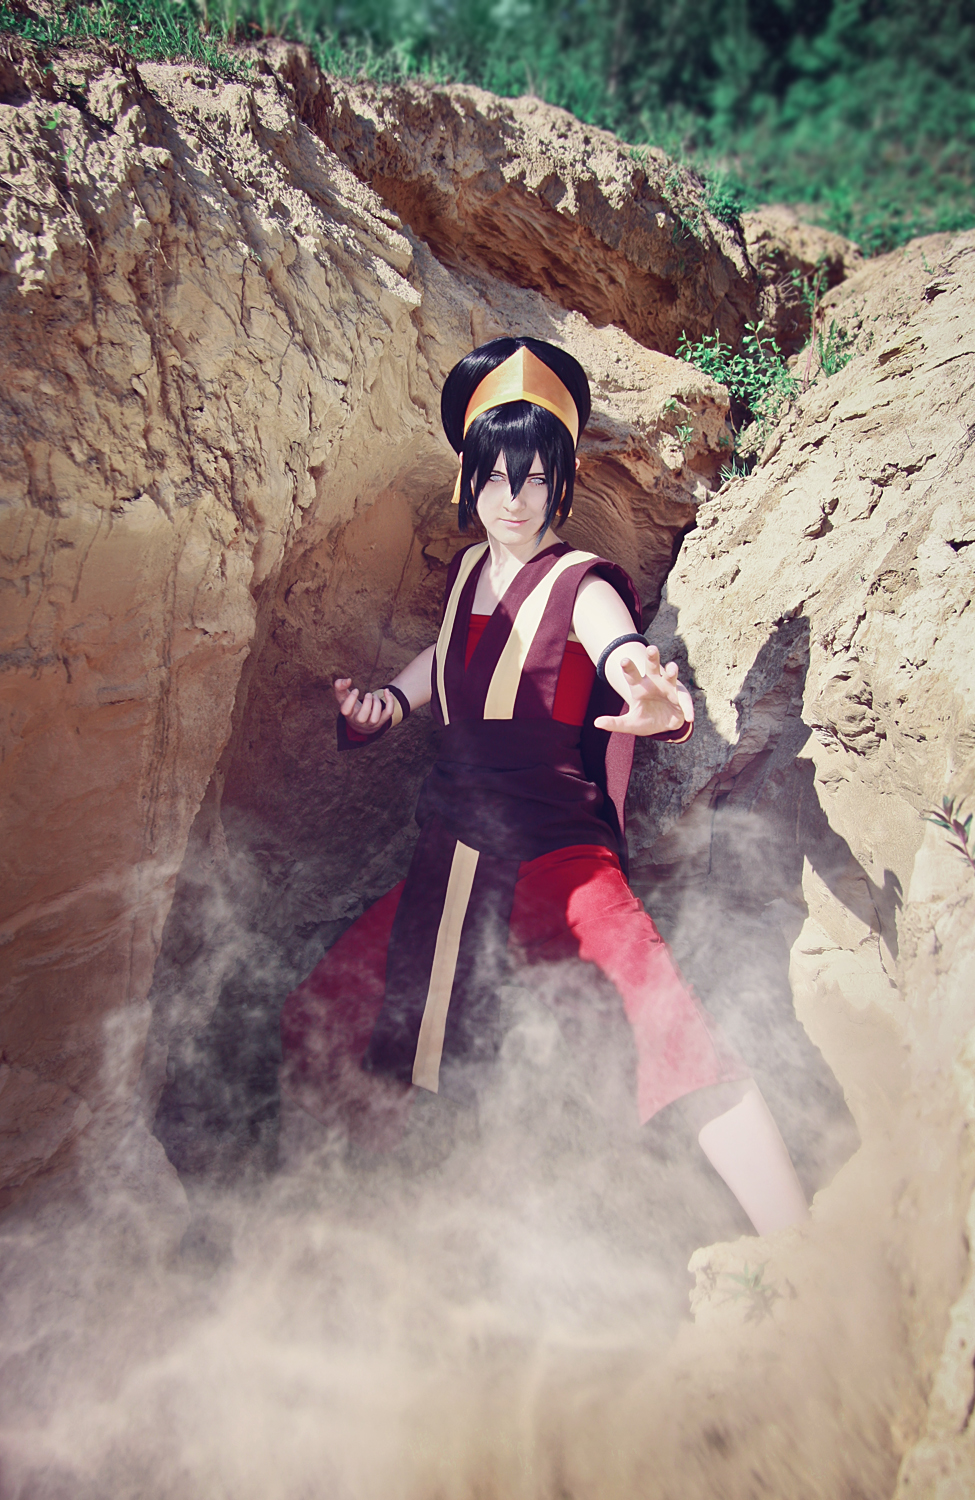 Toph Beifong - Ever seen an Earthbender in action?